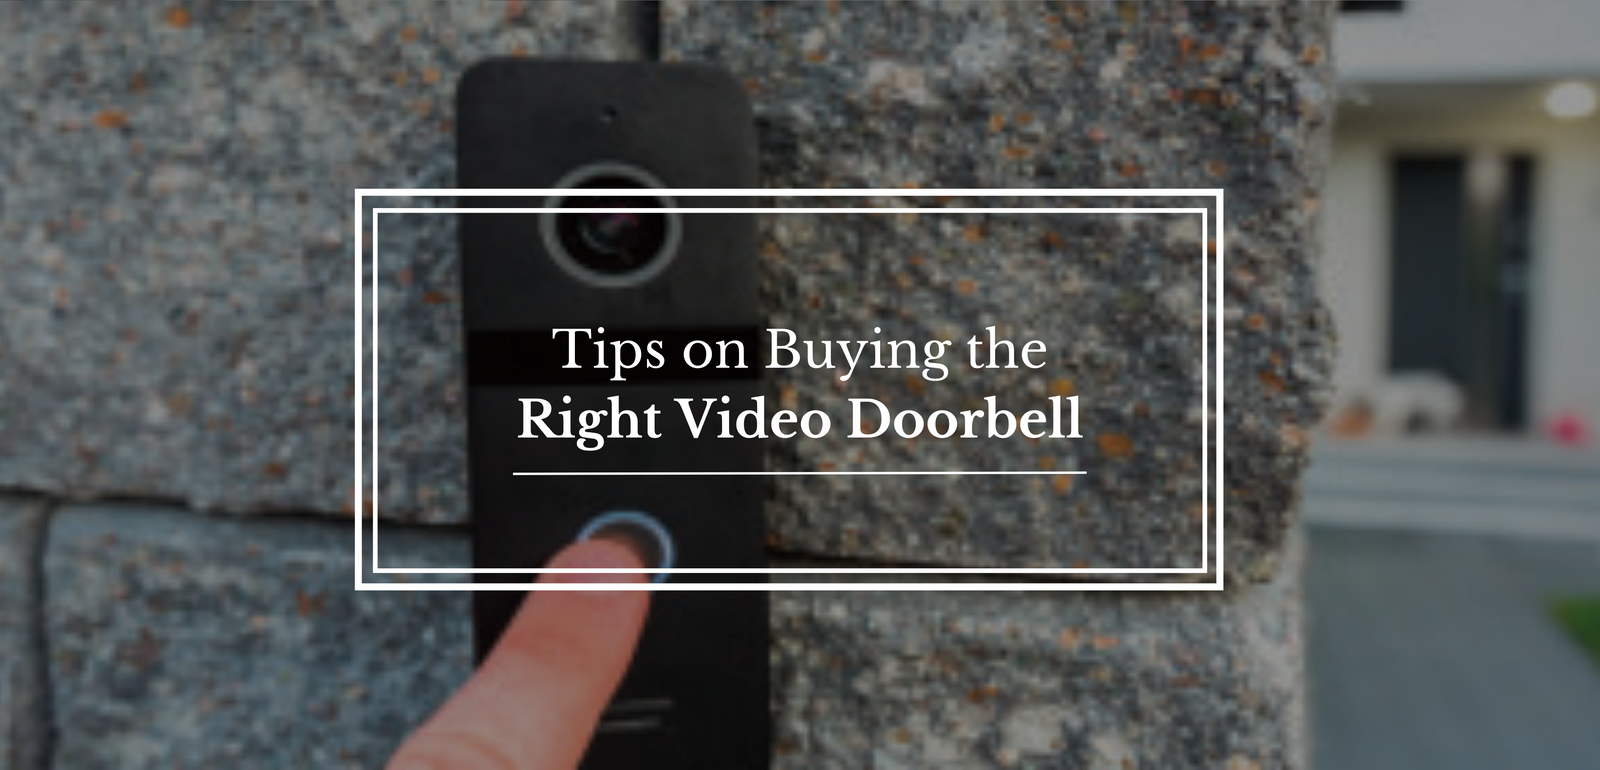 Tips on Buying the Right Video Doorbell